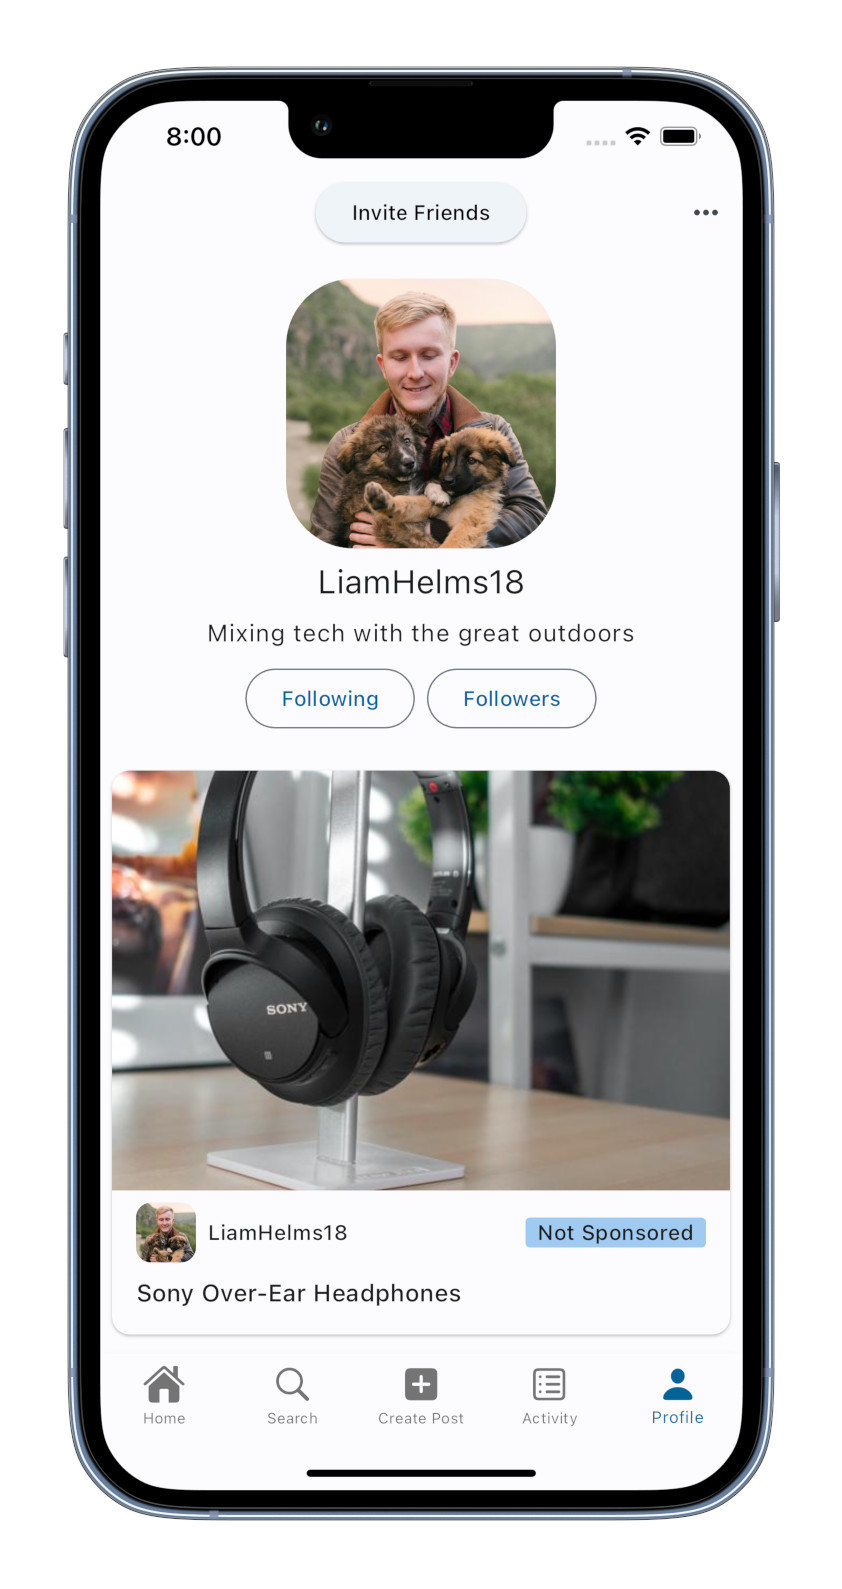 Screenshot of the Pikelane app profile page for LiamHelms18 with a photo of him holding 2 puppies, a description 'Mixing tech with the great outdoors' and his newest post 'Sony Over-Ear Headphones'.